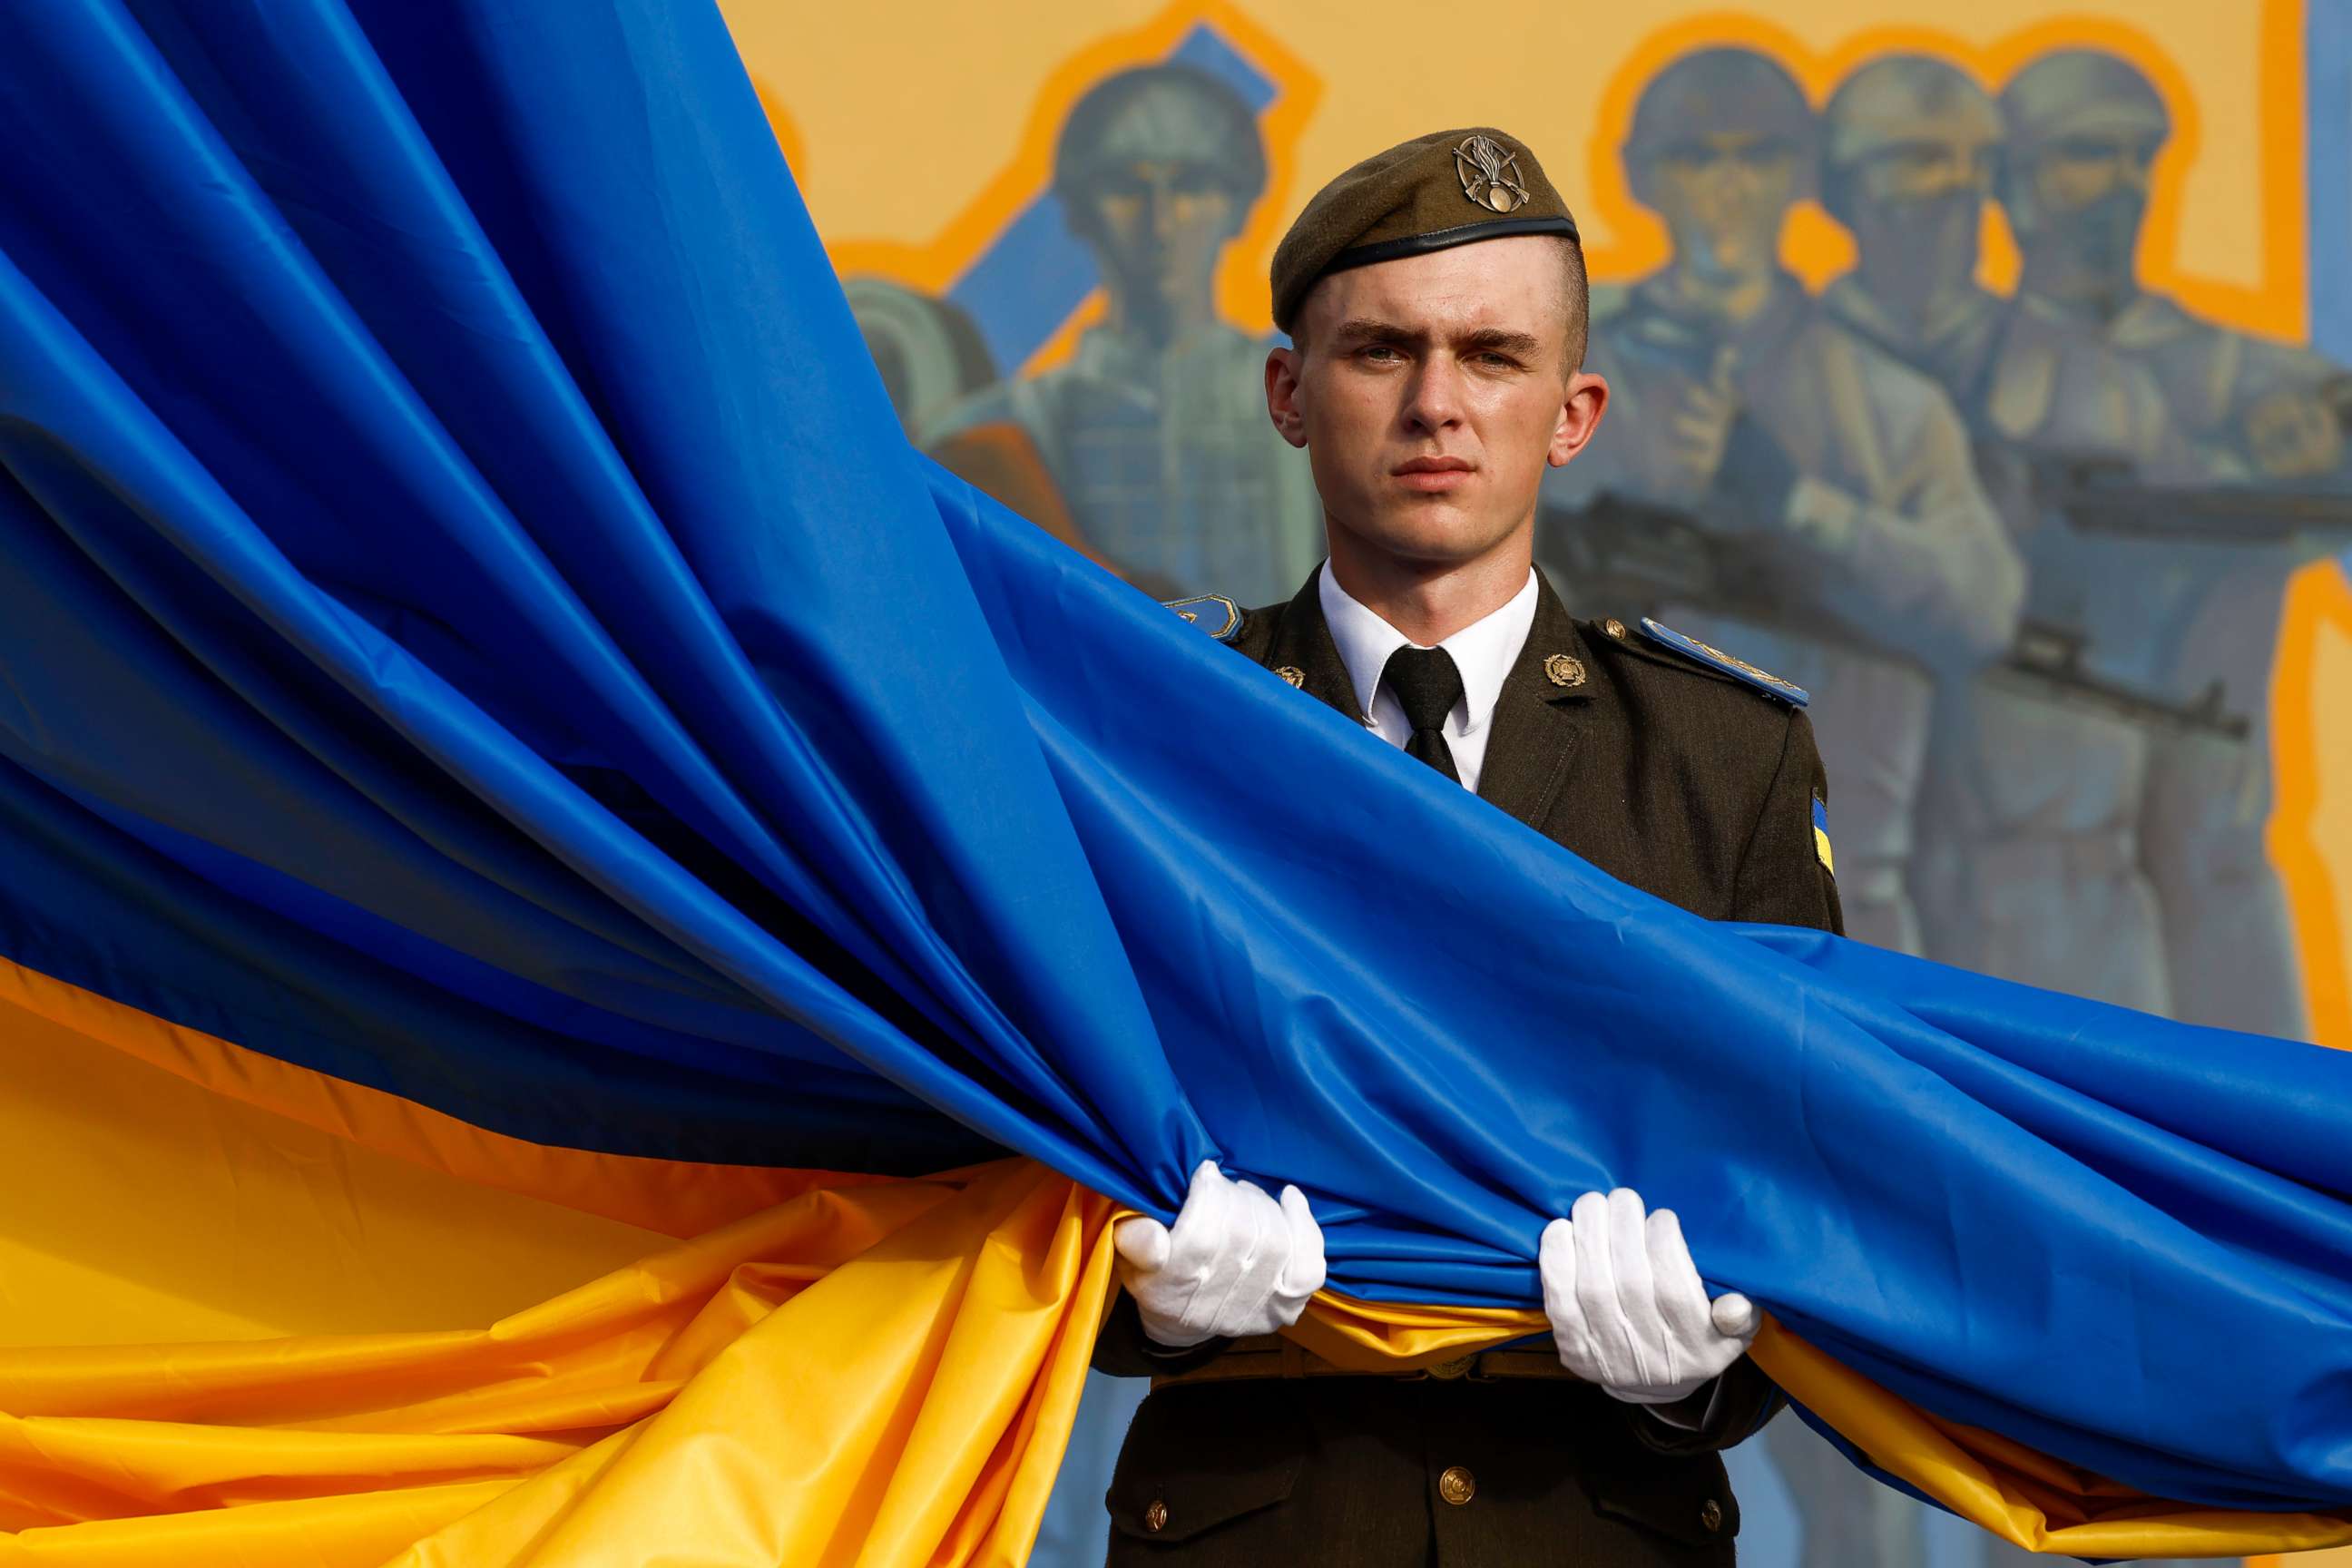 PHOTO: A member of the military attends a flag-raising ceremony at Hetman Petro Sahaidachny National Ground Forces Academy on Aug. 23, 2022, in Lviv, Ukraine.